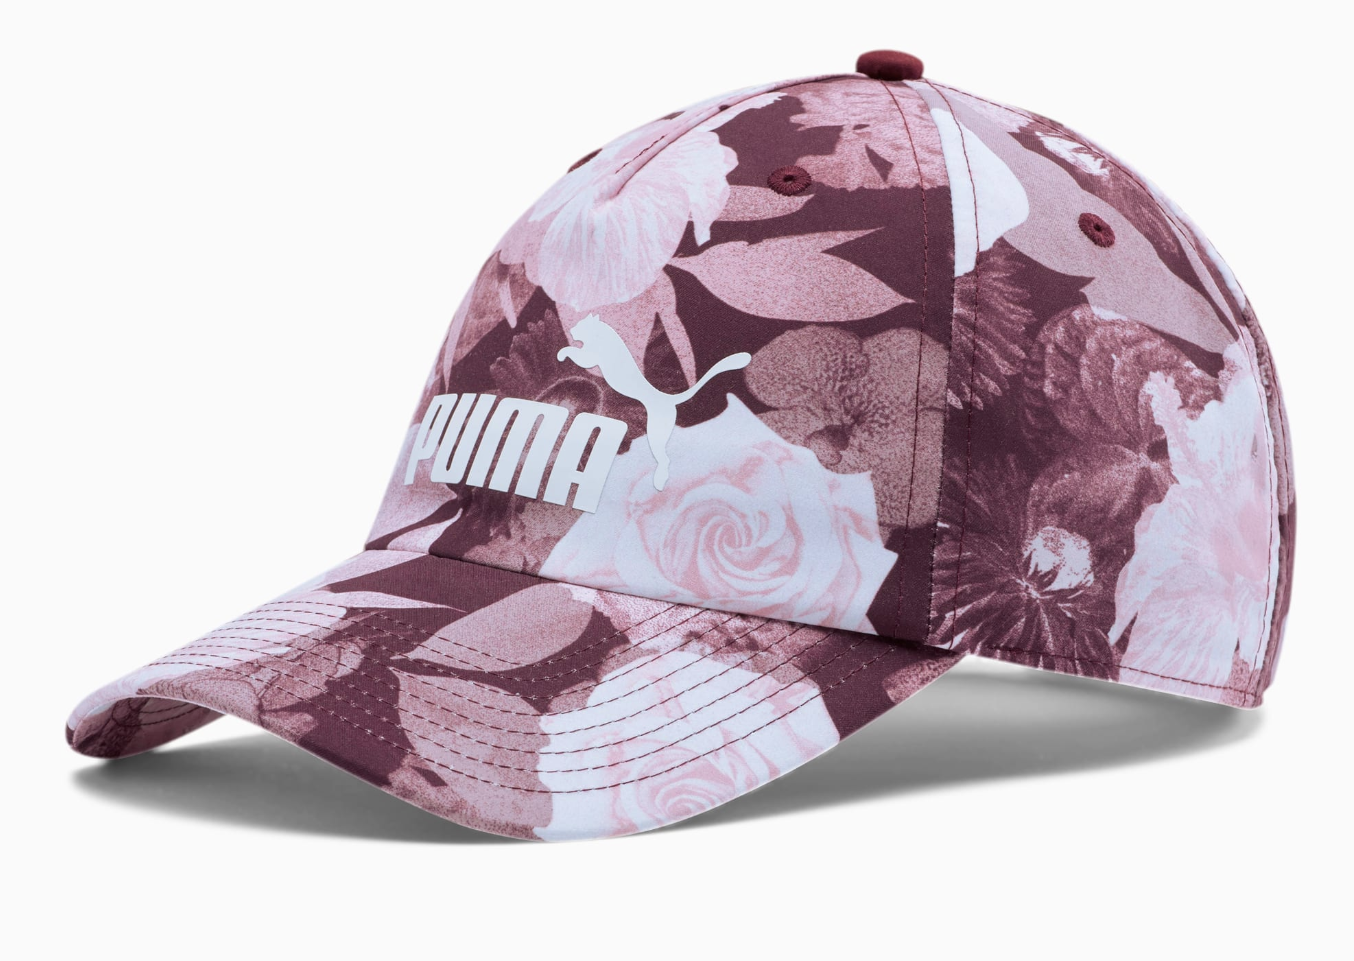 The floral hat in shades of pink and mauve 